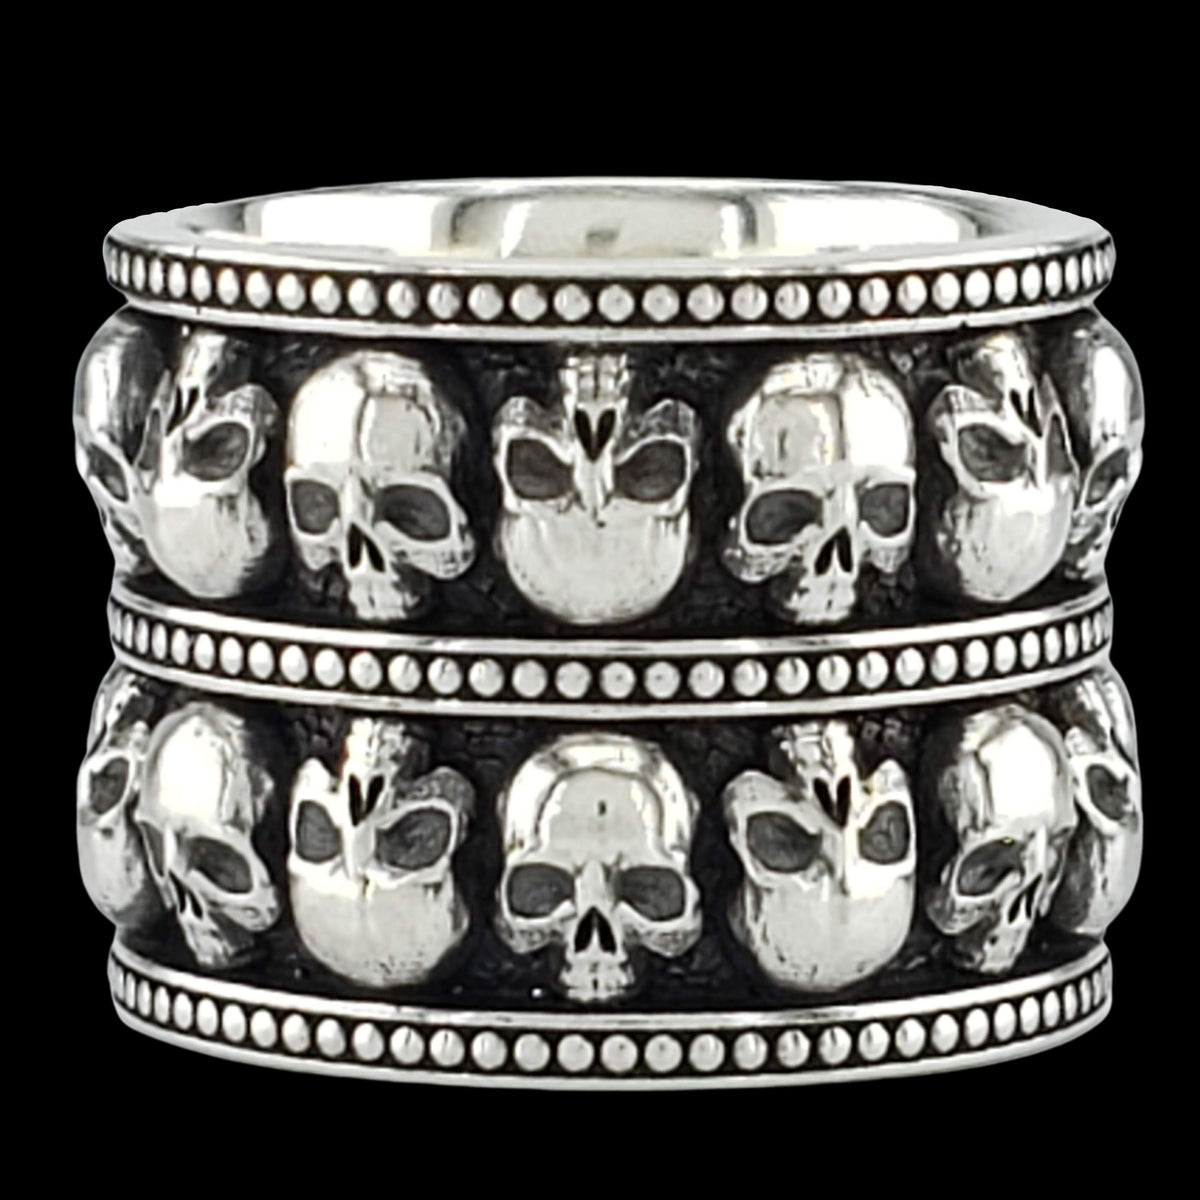 MEMENTO MORI CATACOMBS DOUBLE STACK WIDE SKULL BAND RING - Starting at $229